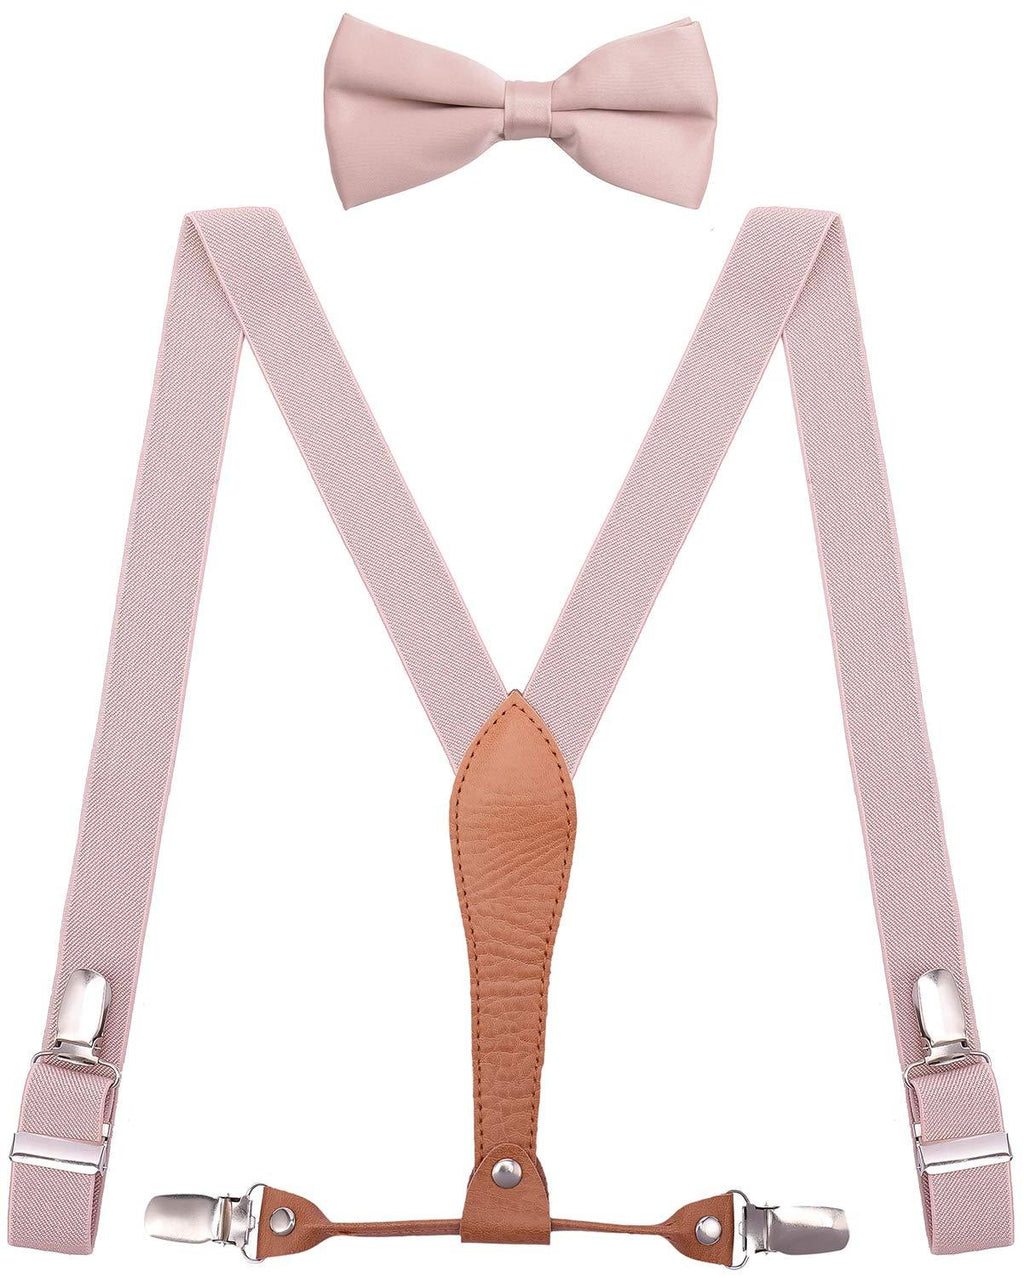 [Australia] - WDSKY Mens Boys Suspenders and Bow Tie Elastic with Leather Y-Back 24" 6 months to 3yrs Blush Pink 